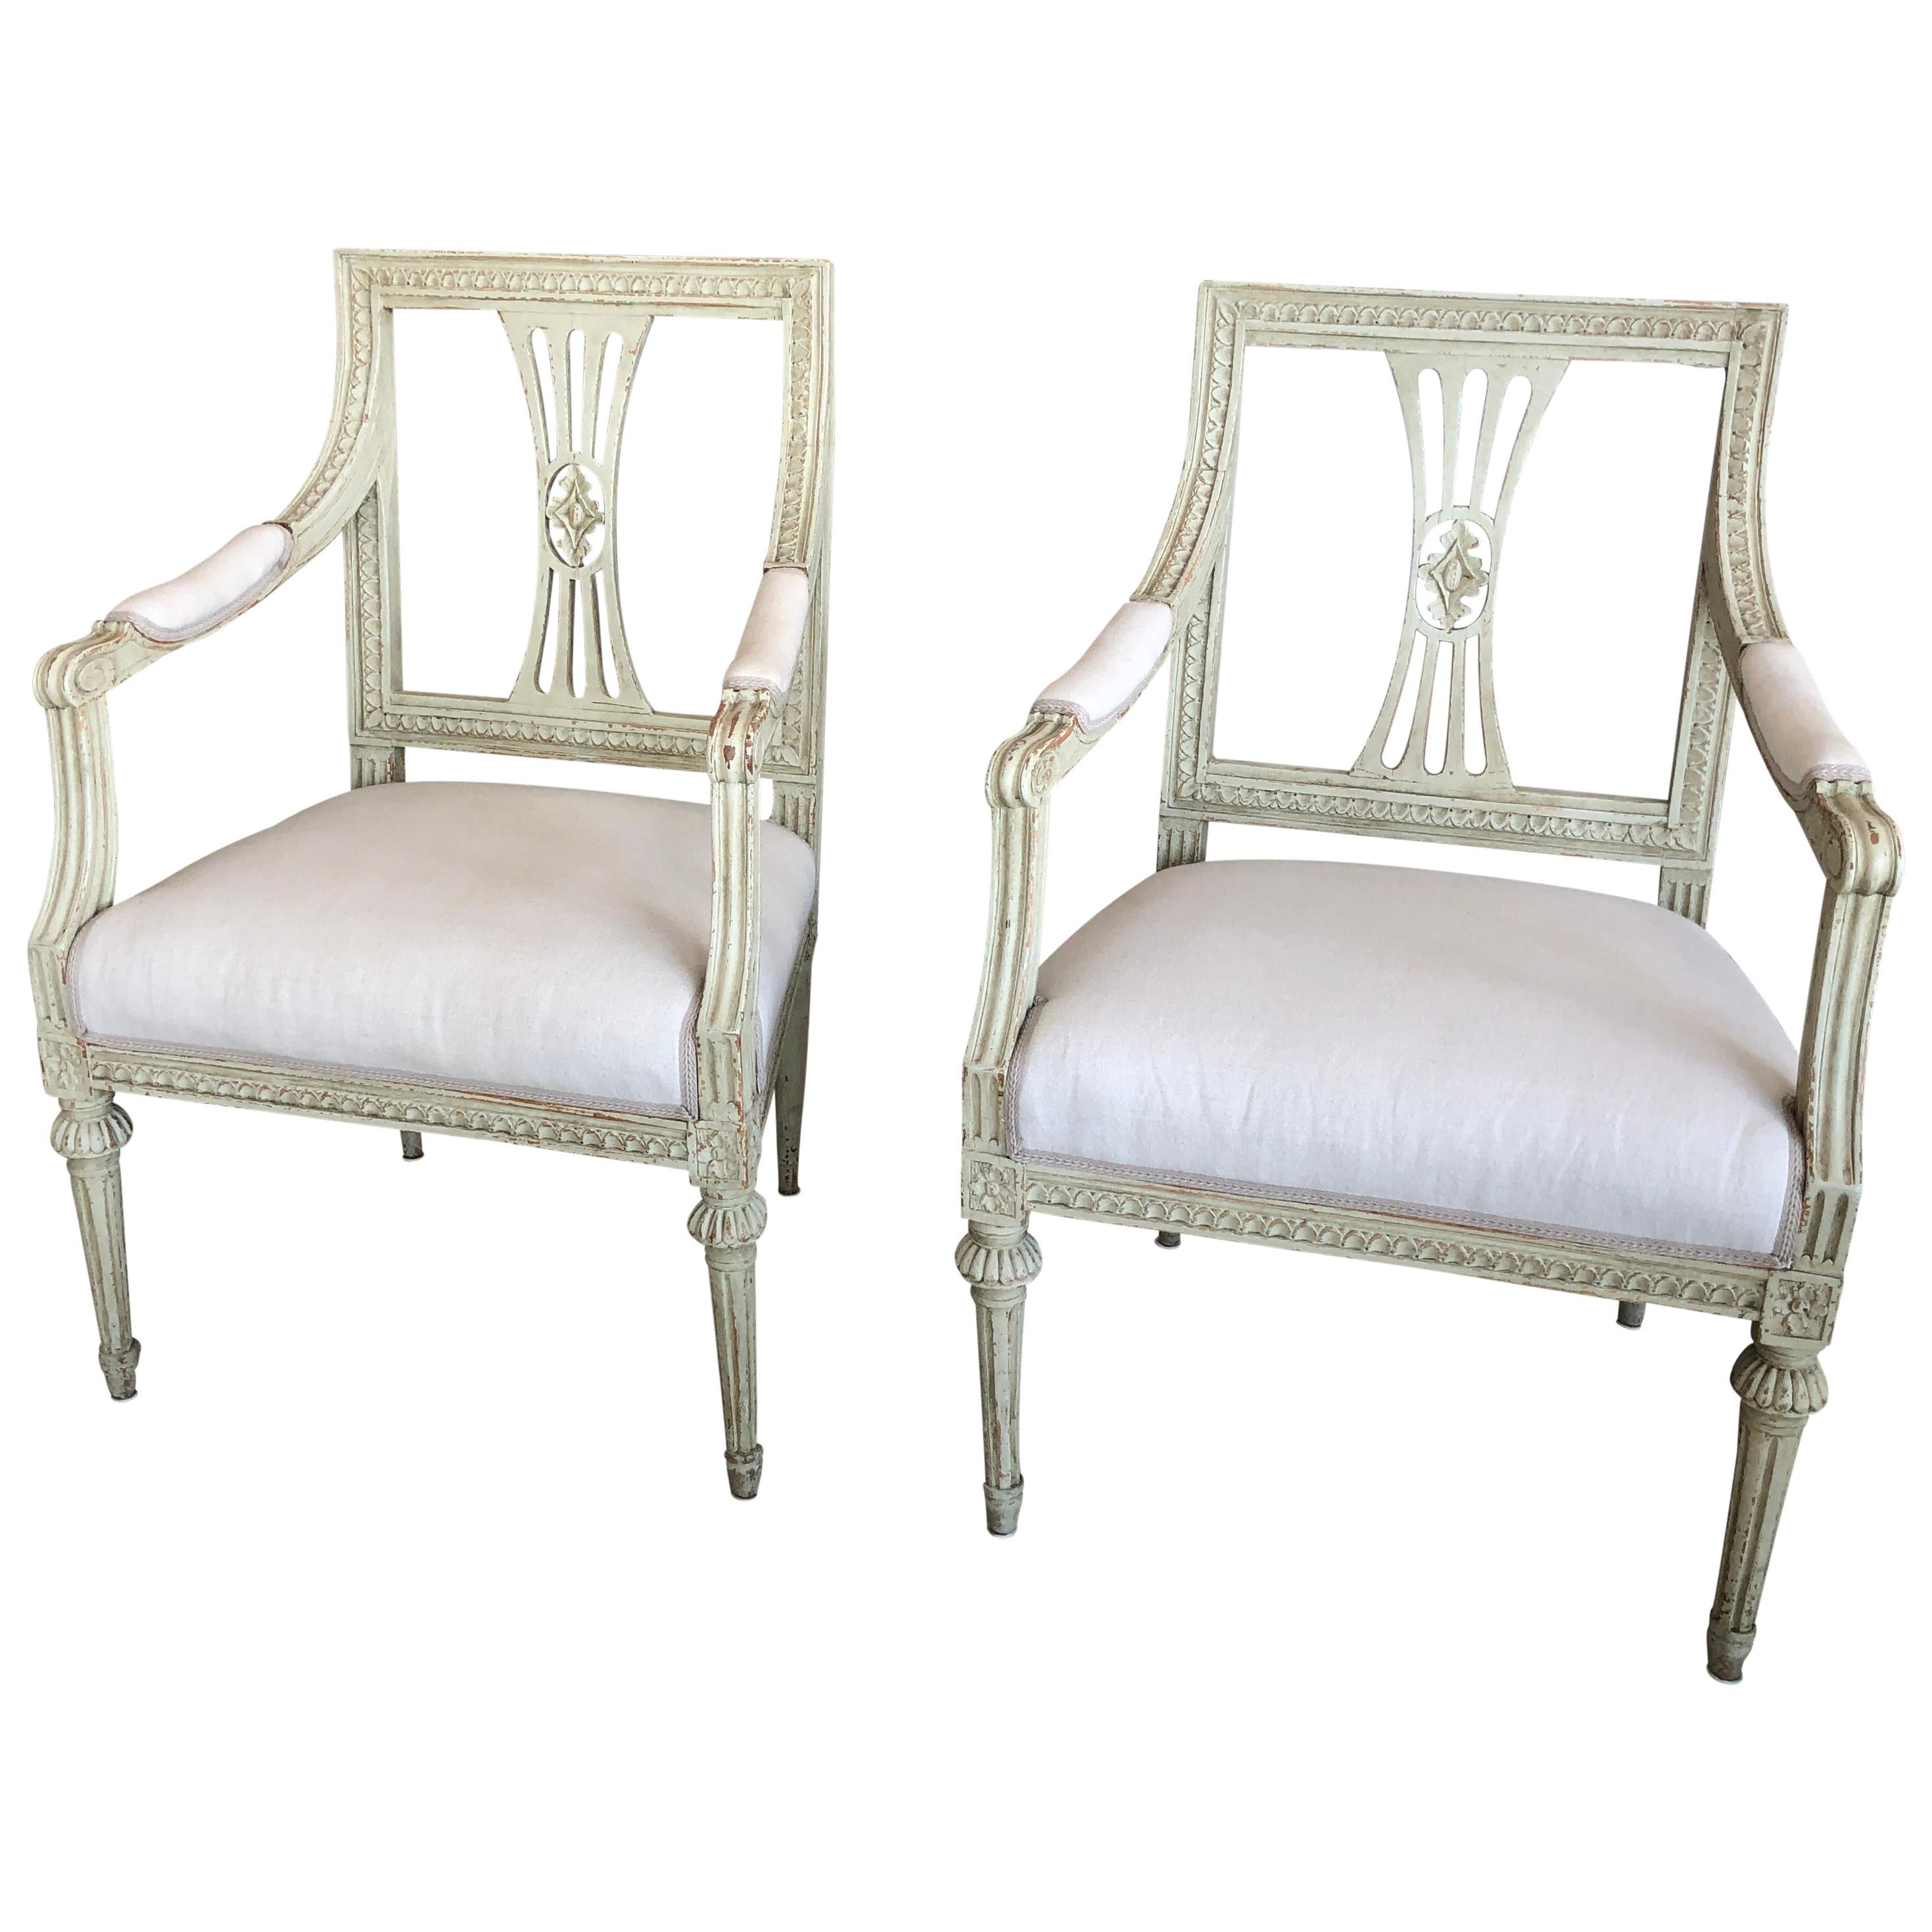 Pair of Antique Swedish Painted Gustavian Armchairs, circa 1810-1820 For Sale